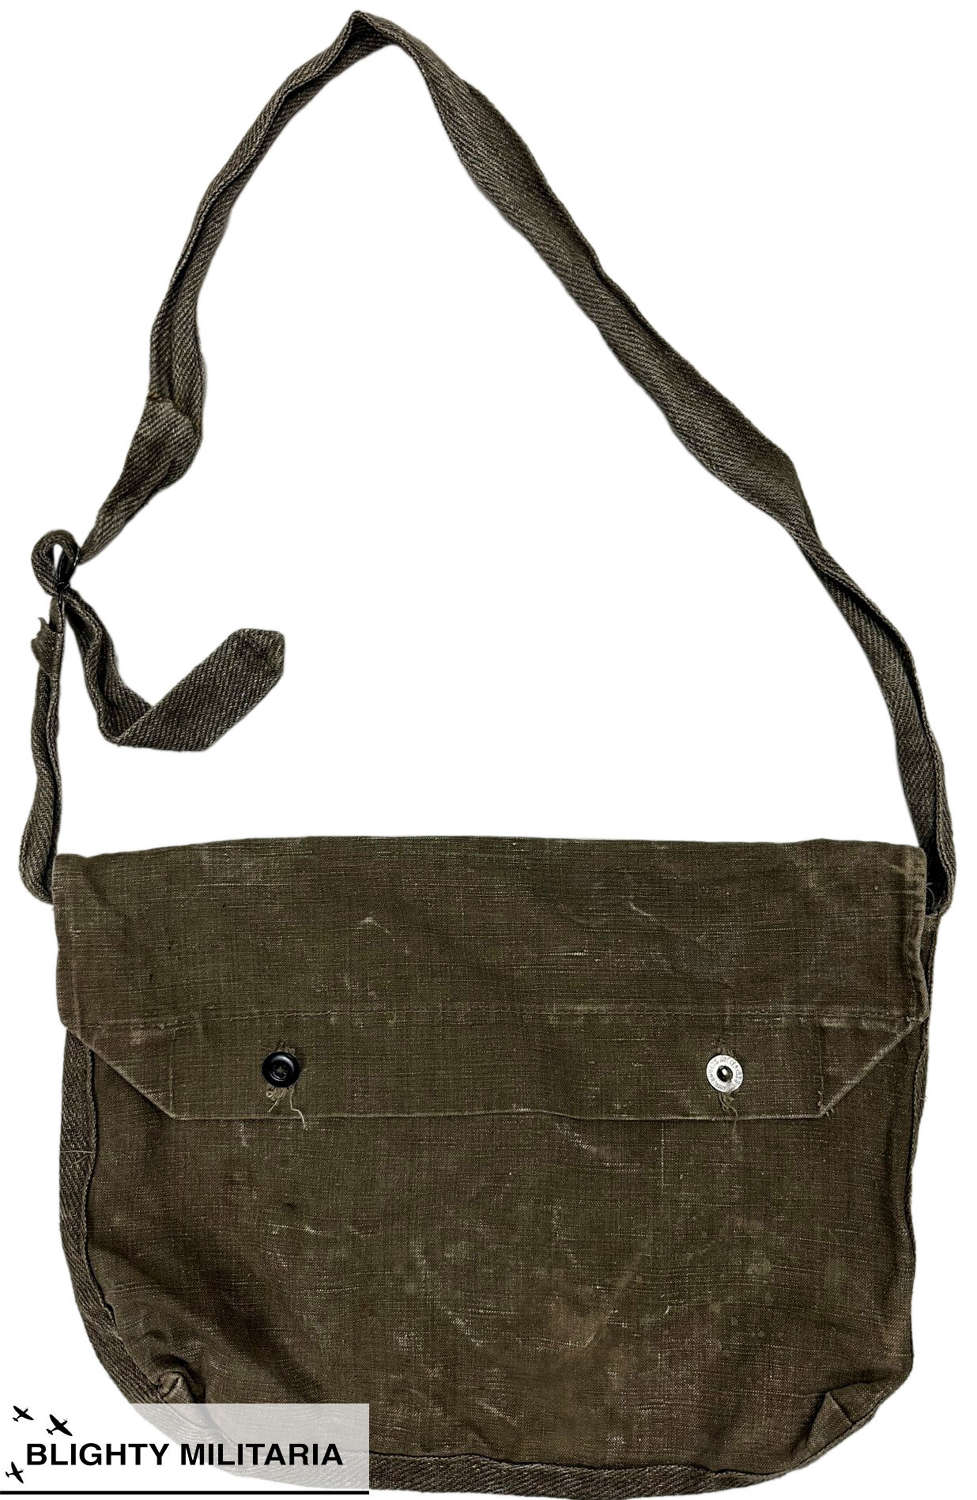 Original 1940s French Army Modele 1892 Musette Bag Haversack